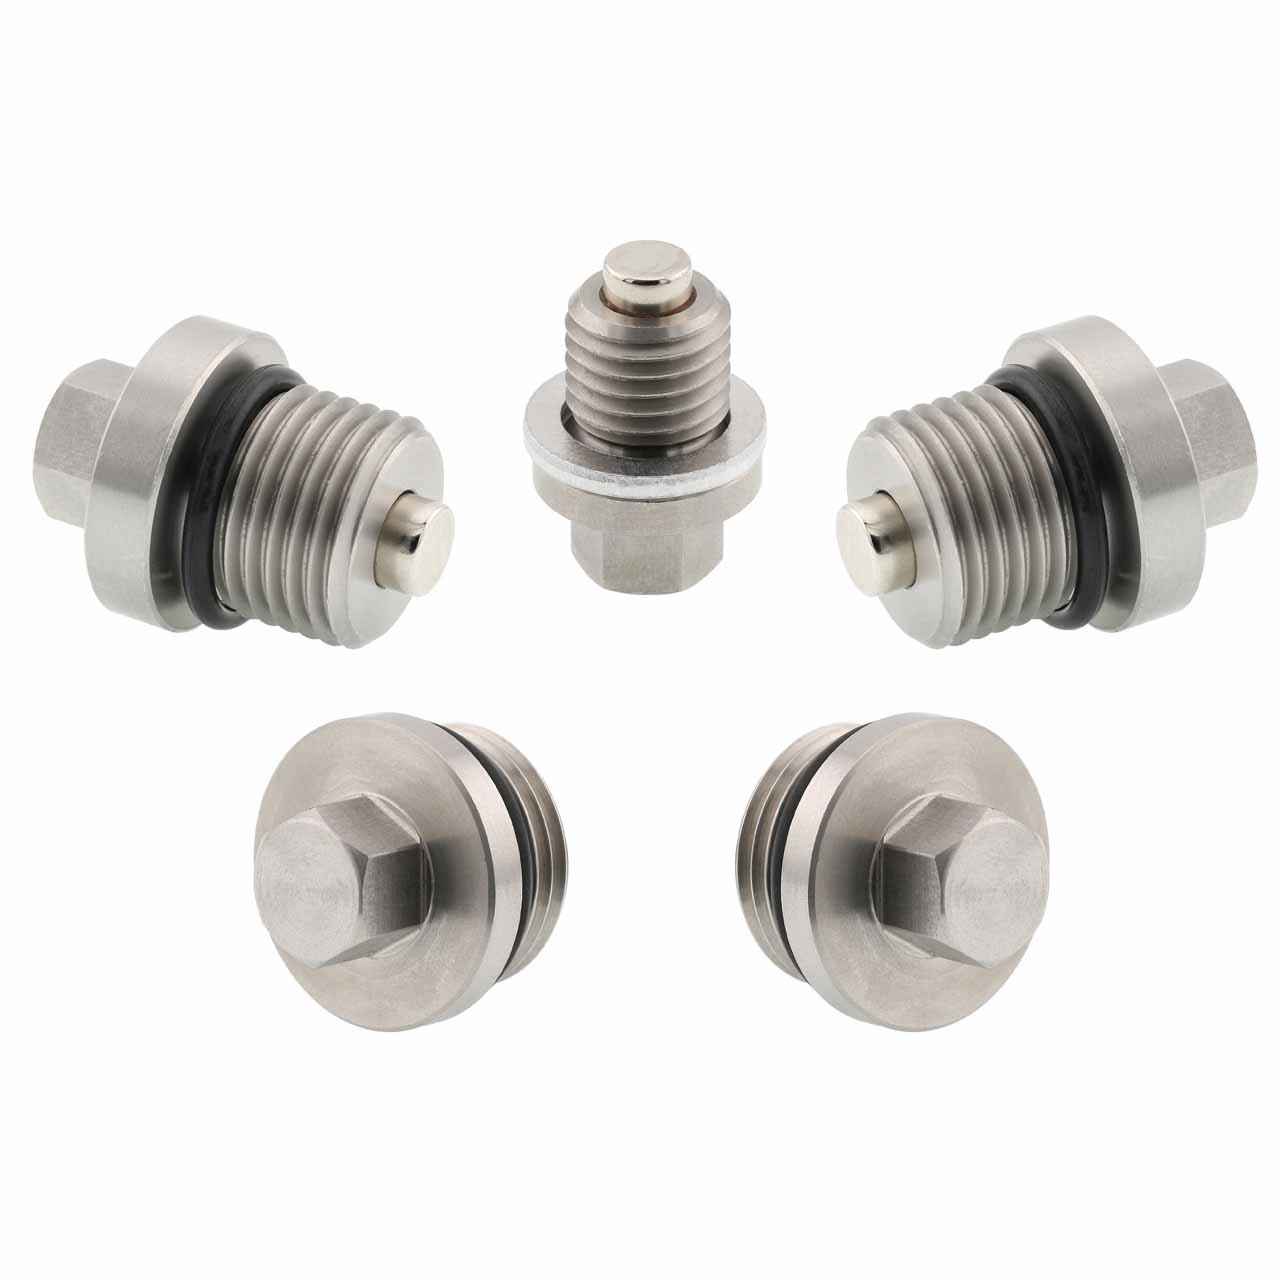 Polaris RZR S 1000 EPS Magnetic Oil Drain Plug Kit - 2015-2021 - Engine, Transmission, Differential - Made In USA